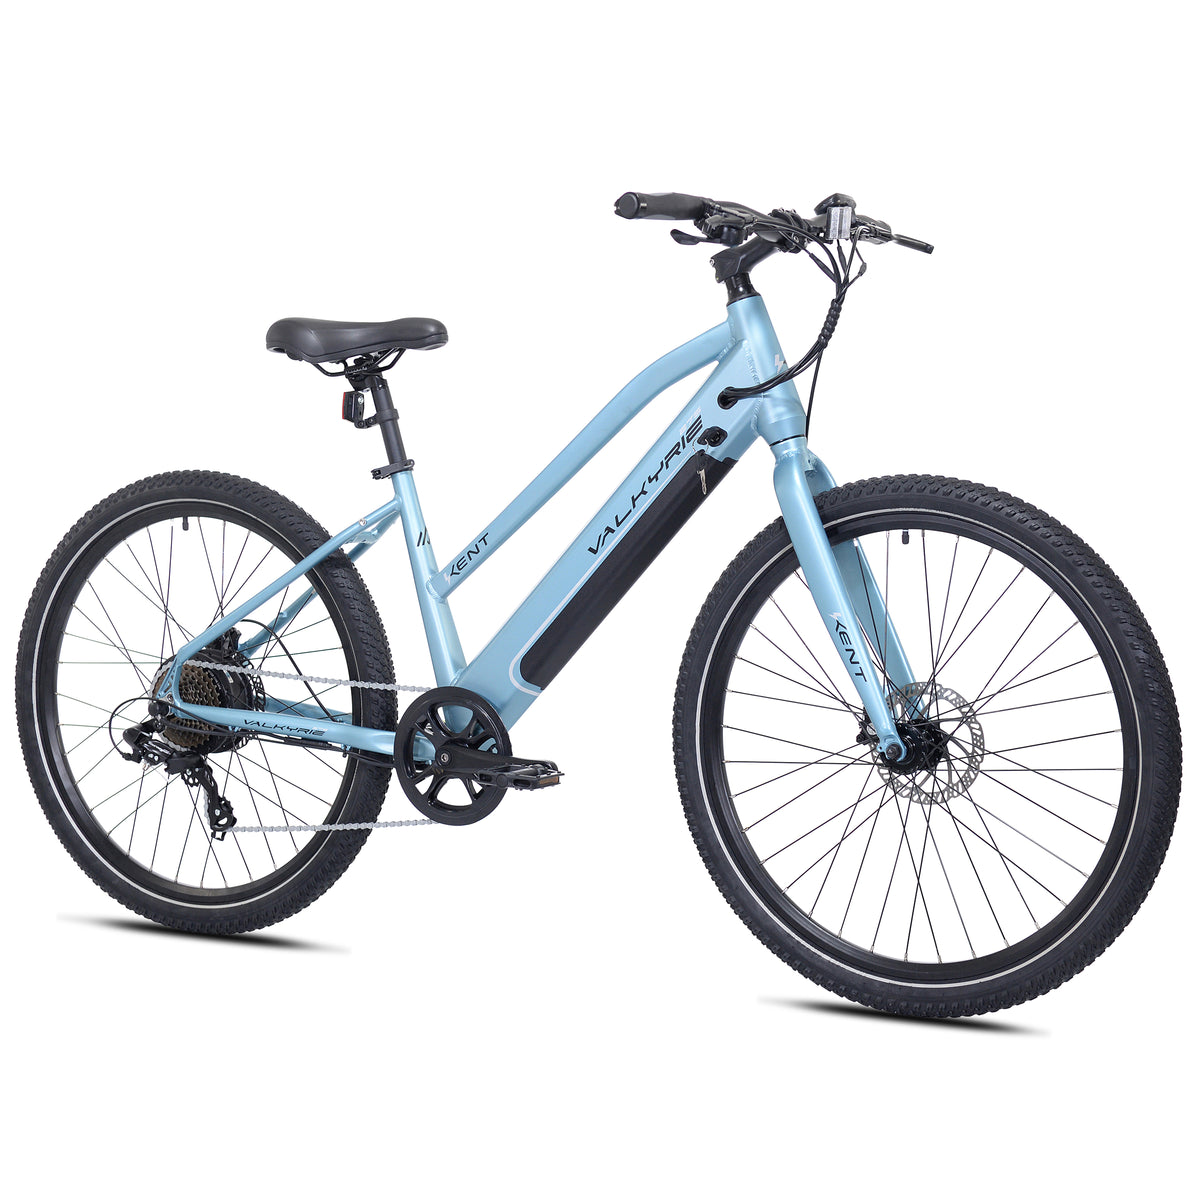 27.5" Kent Valkyrie E-Bike | Electric Mountain Bike for Women Ages 14+